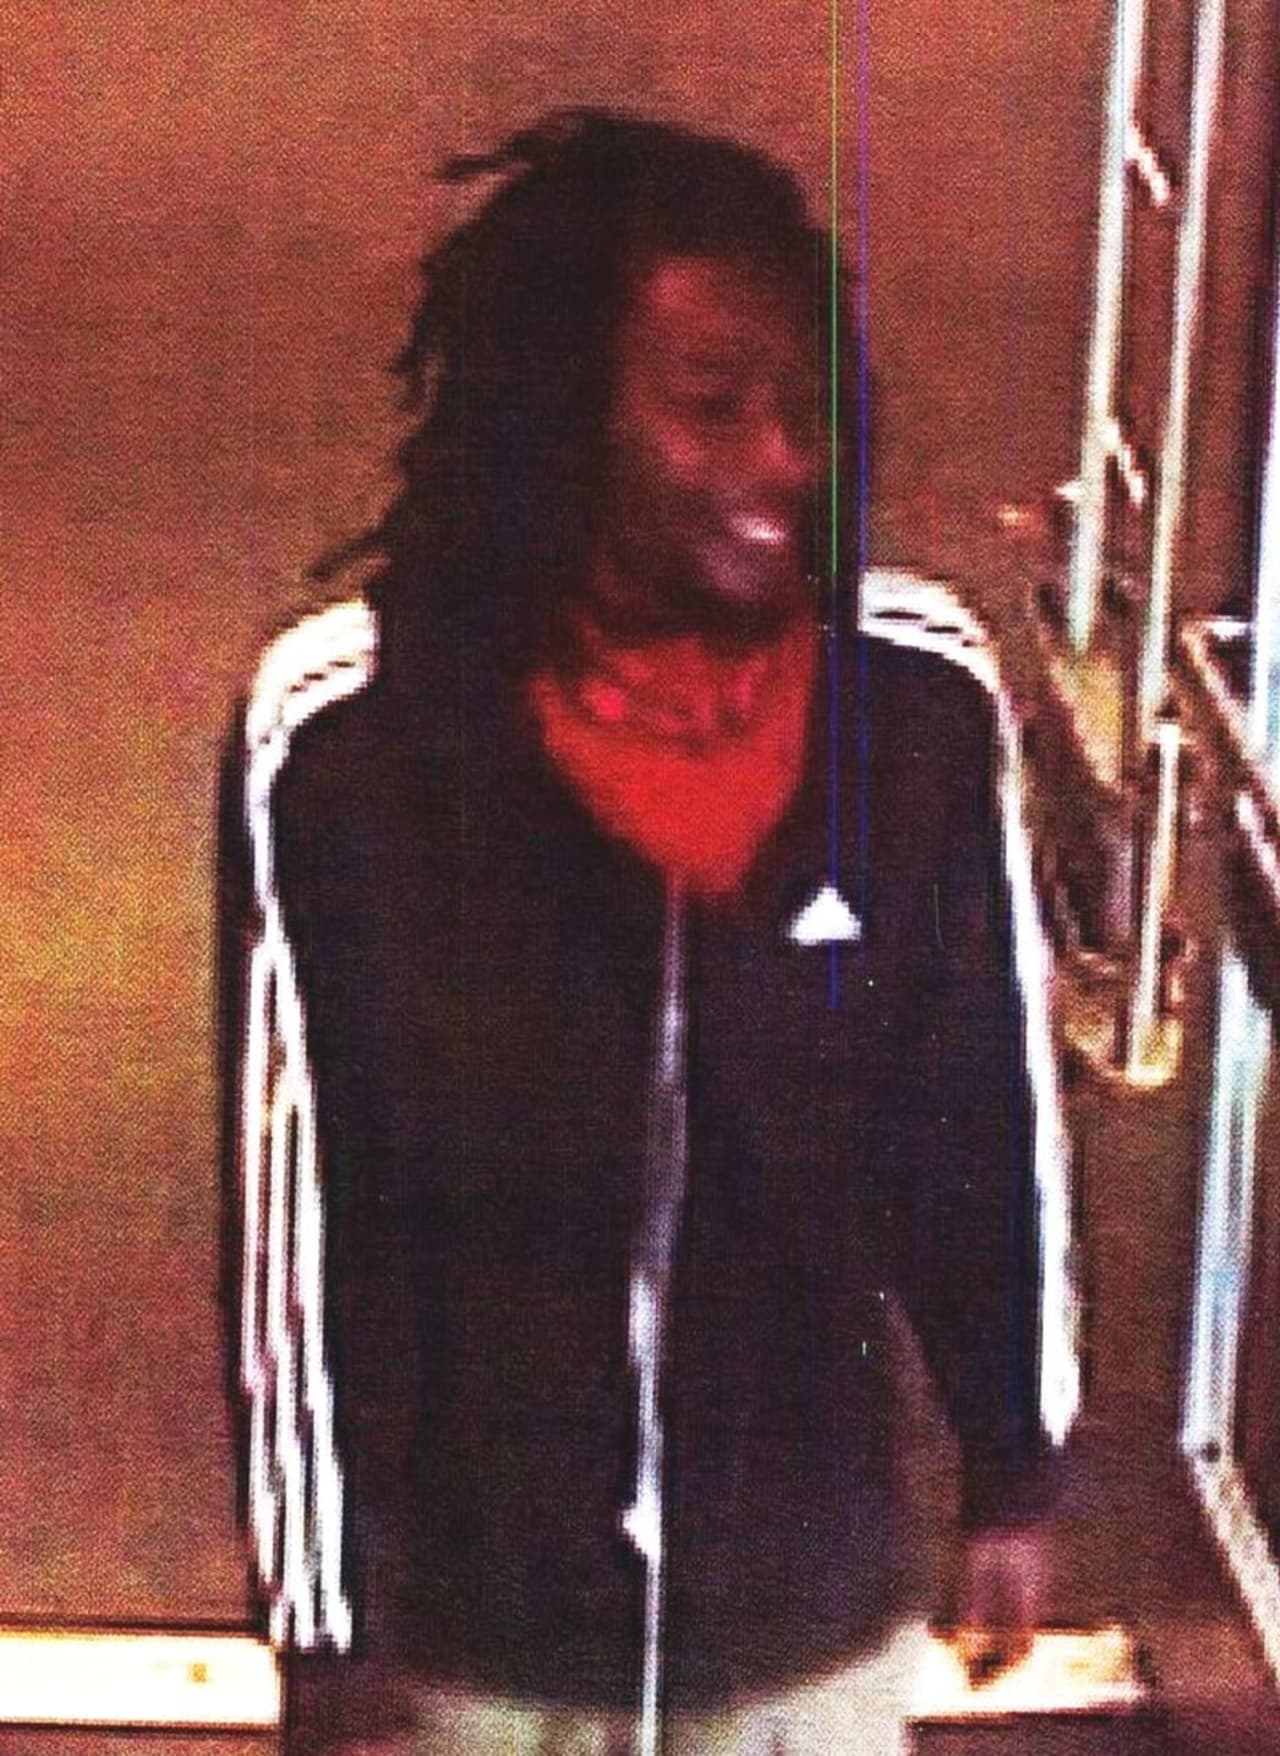 A woman is wanted by police in Suffolk County after allegedly stealing from Target in Bay Shore